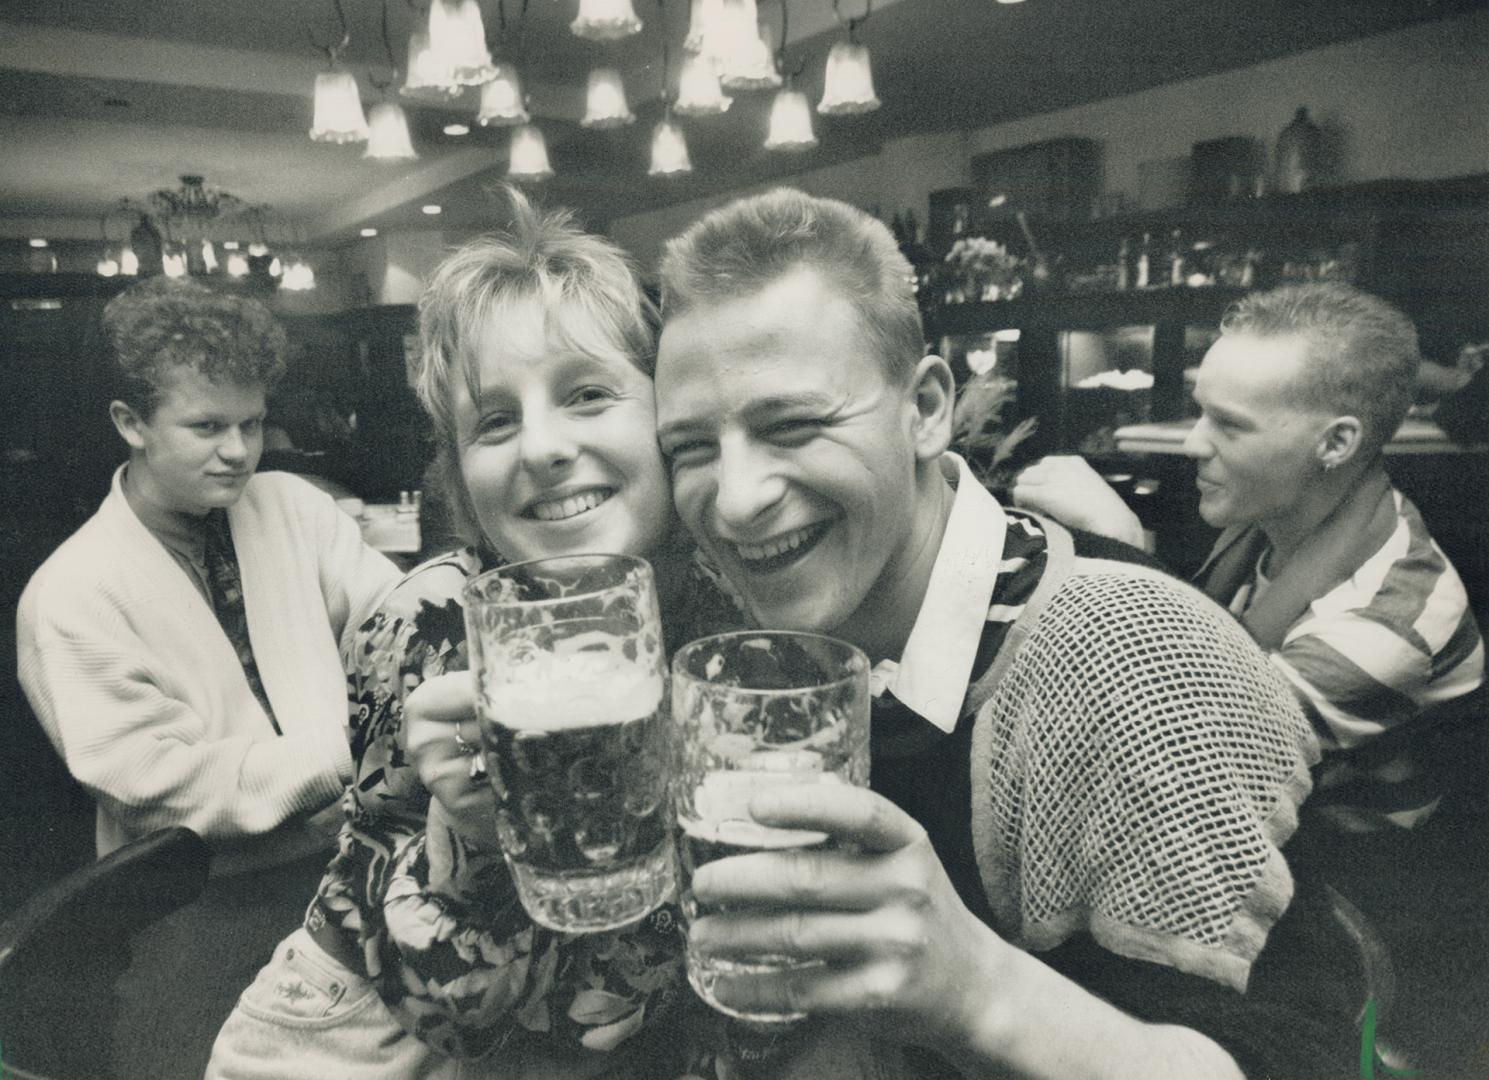 Together again: Irena Bricki, left, of West Berlin and friend Marion Deuster of East Berlin celebrate reunion in an East Berlin bar